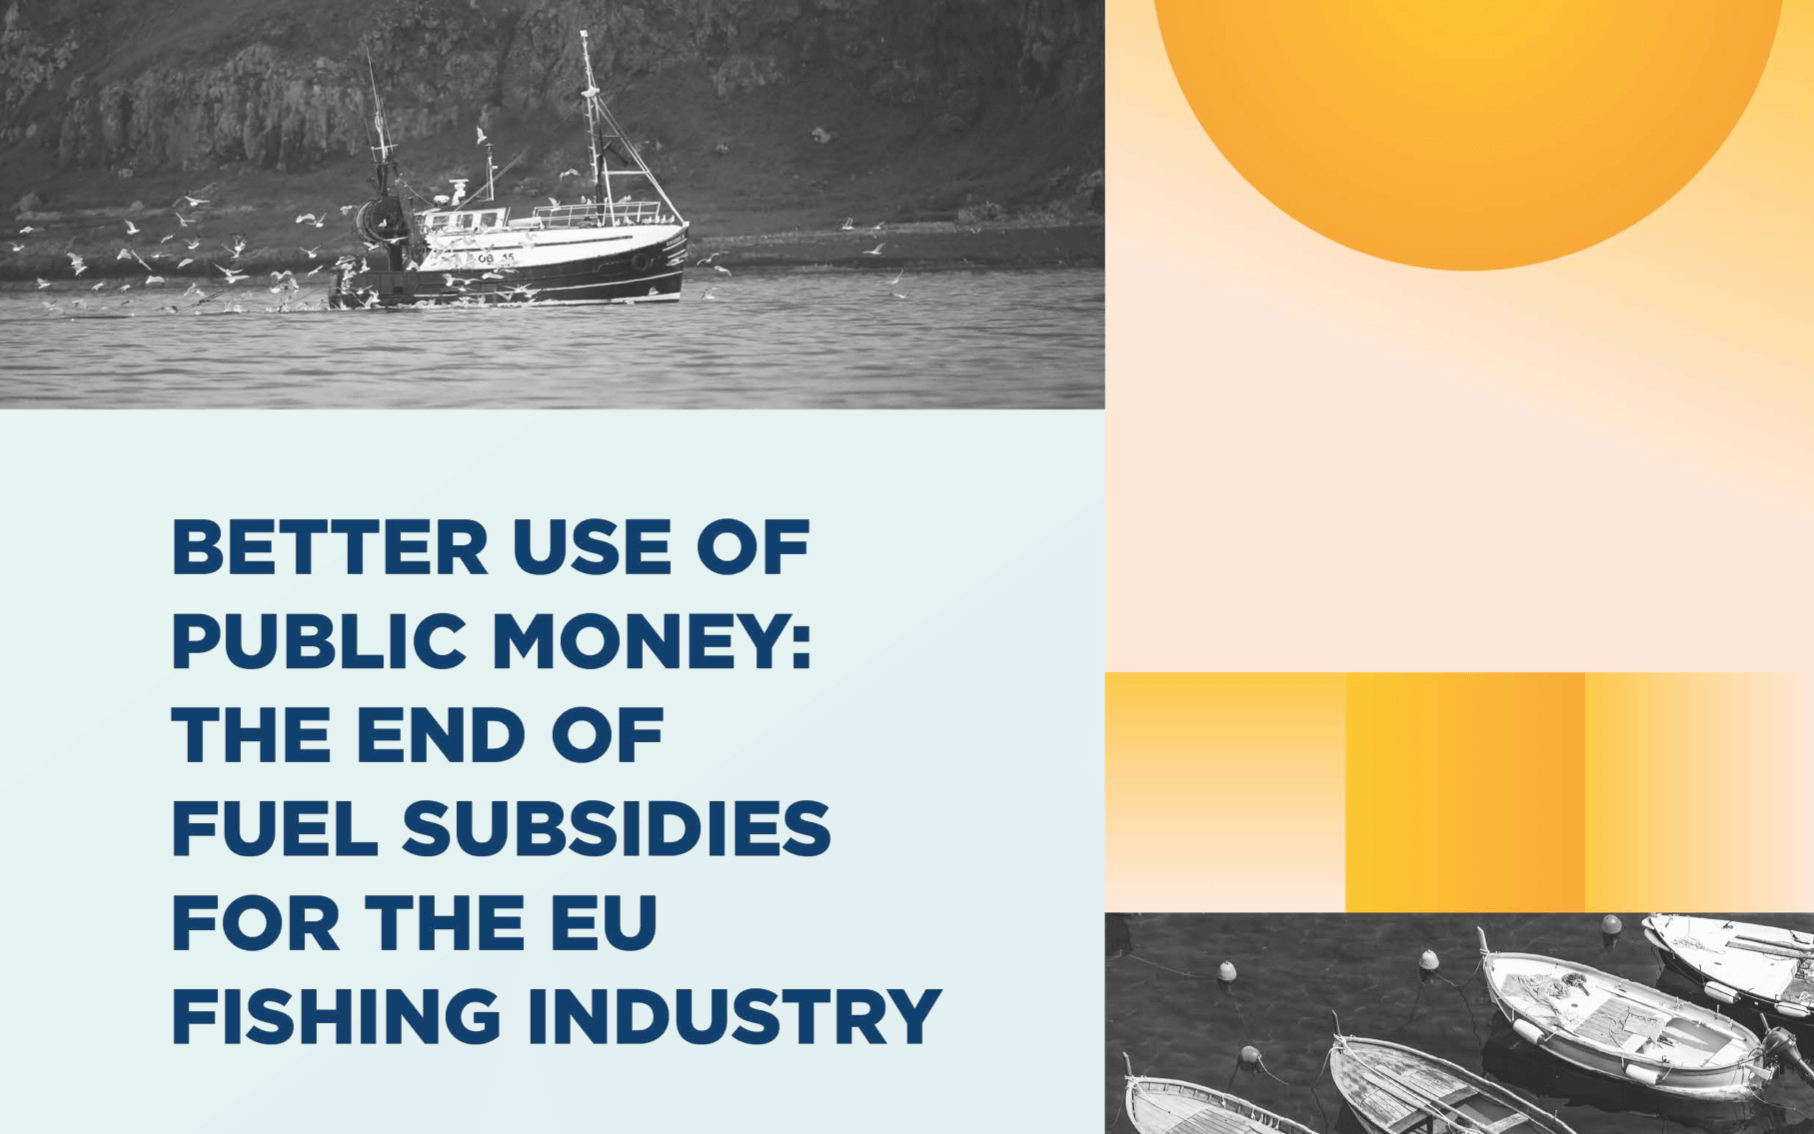 Better Use of Public Money: the End of Fuel Subsidies for the EU Fishing Industry